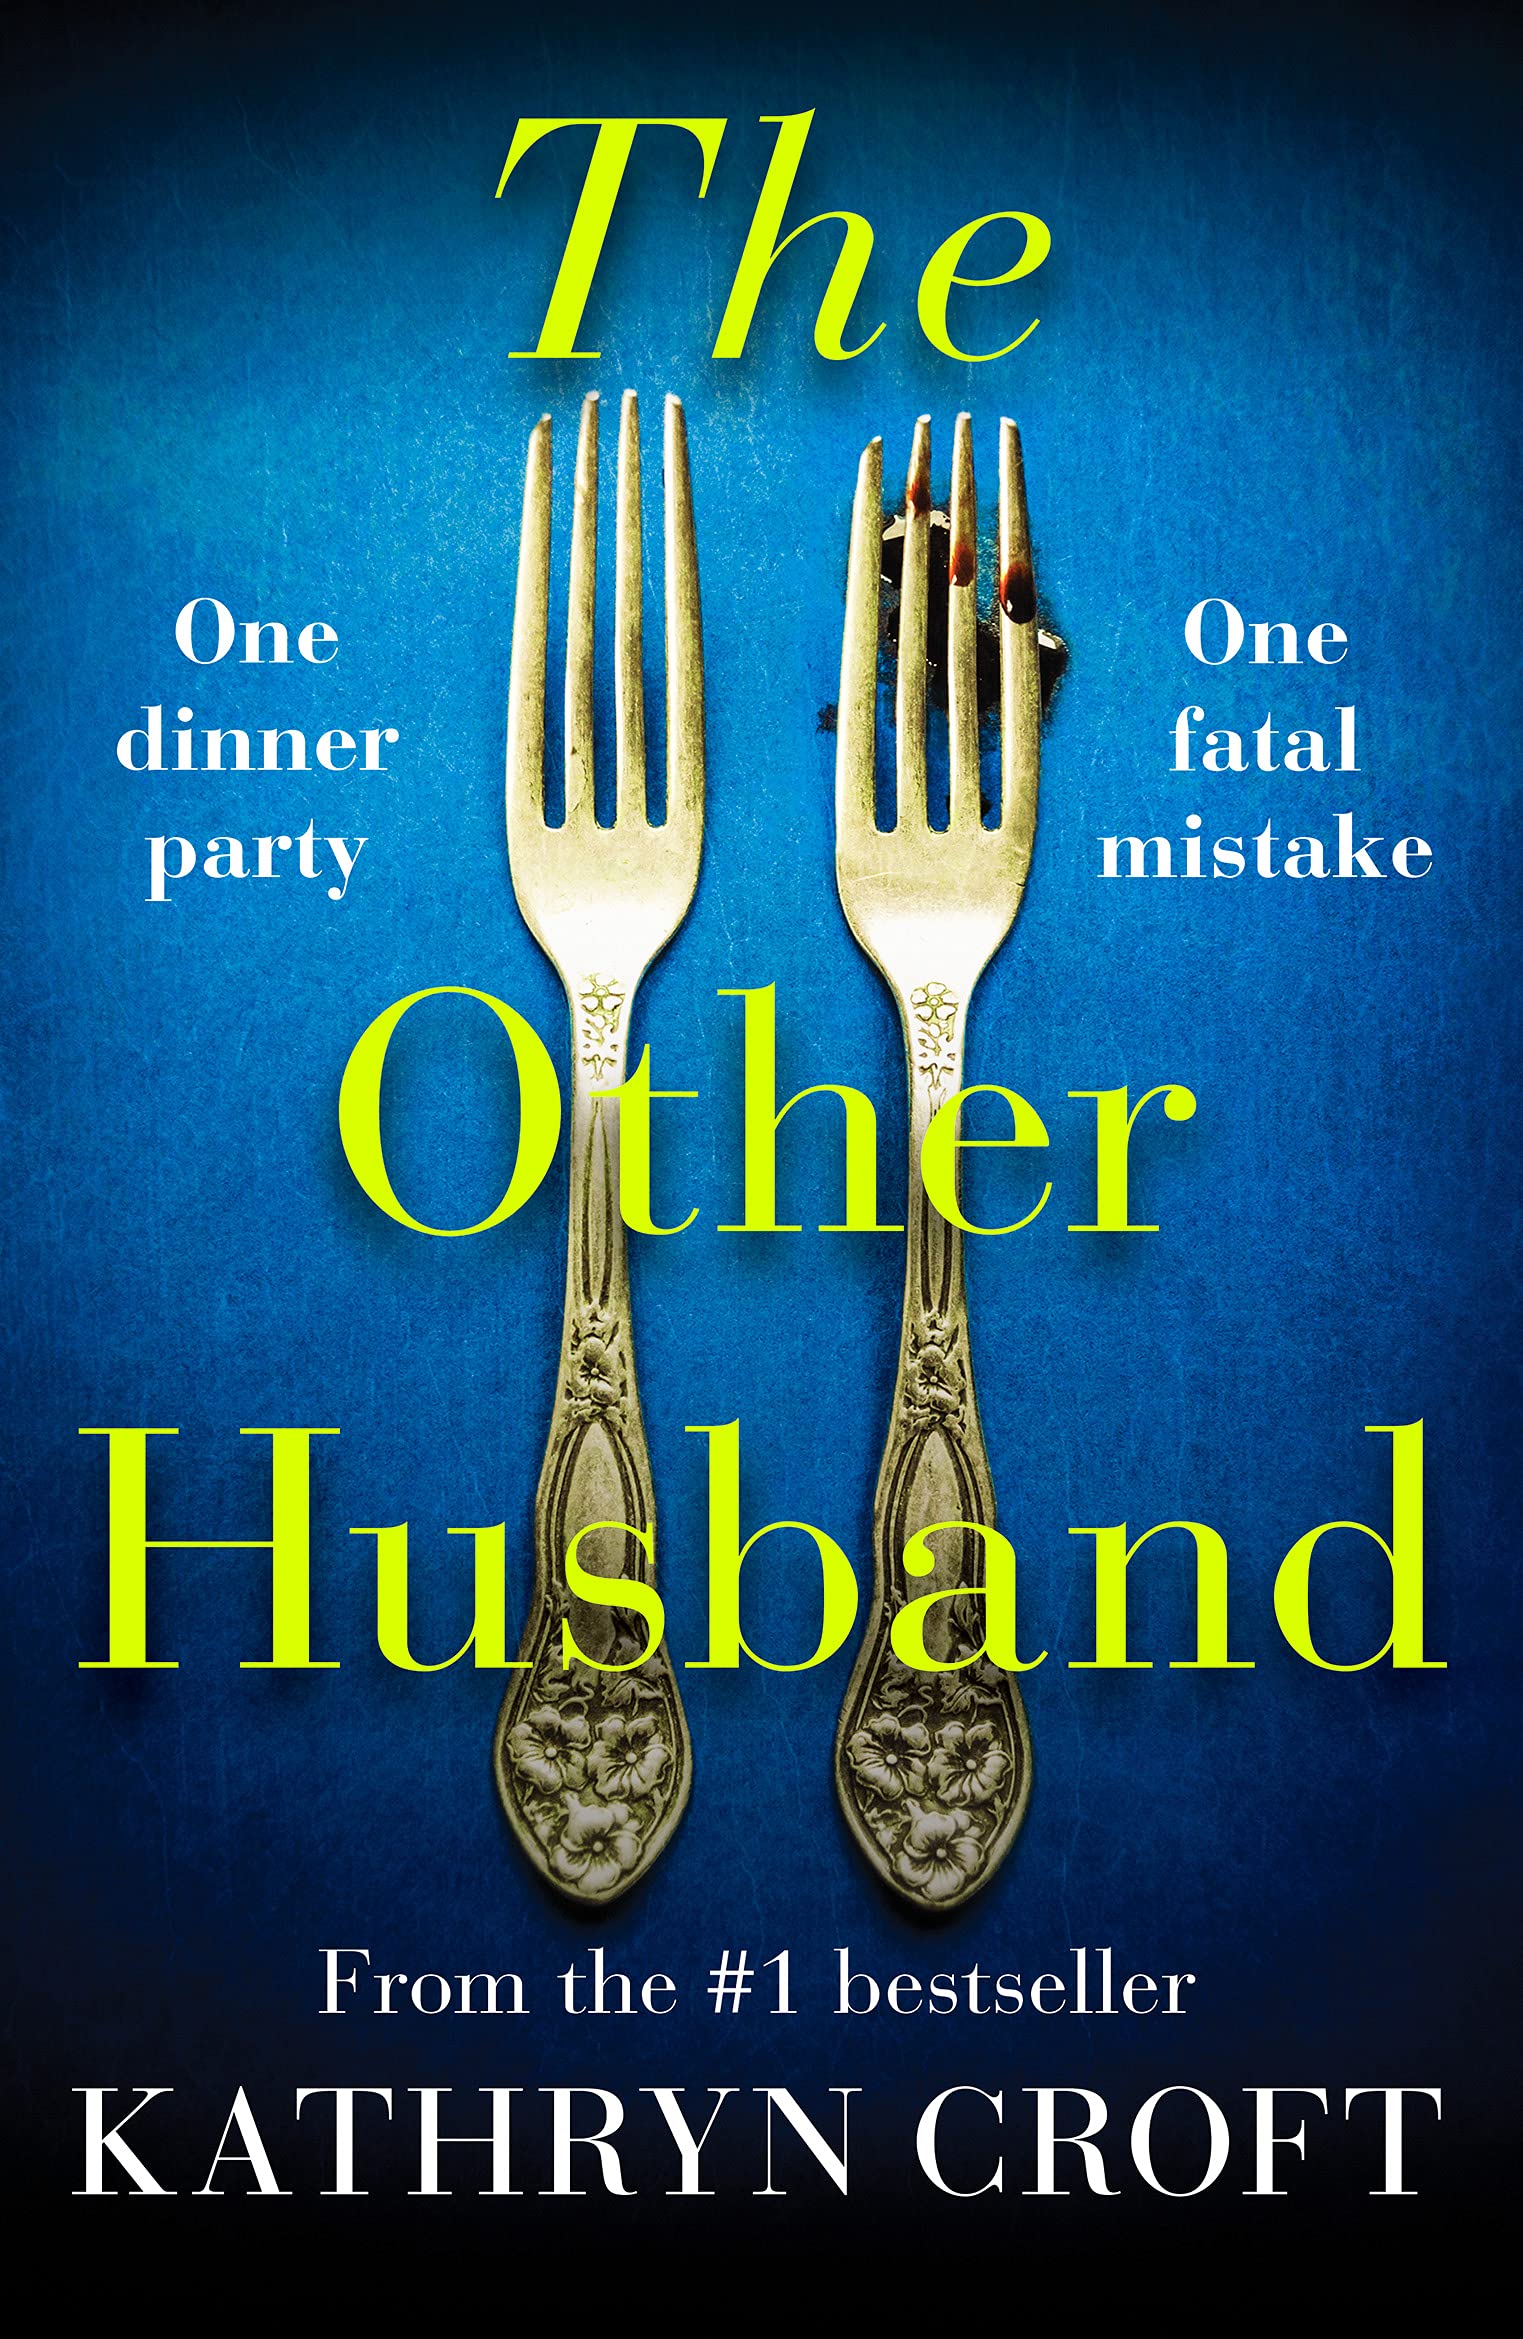 The Other Husband